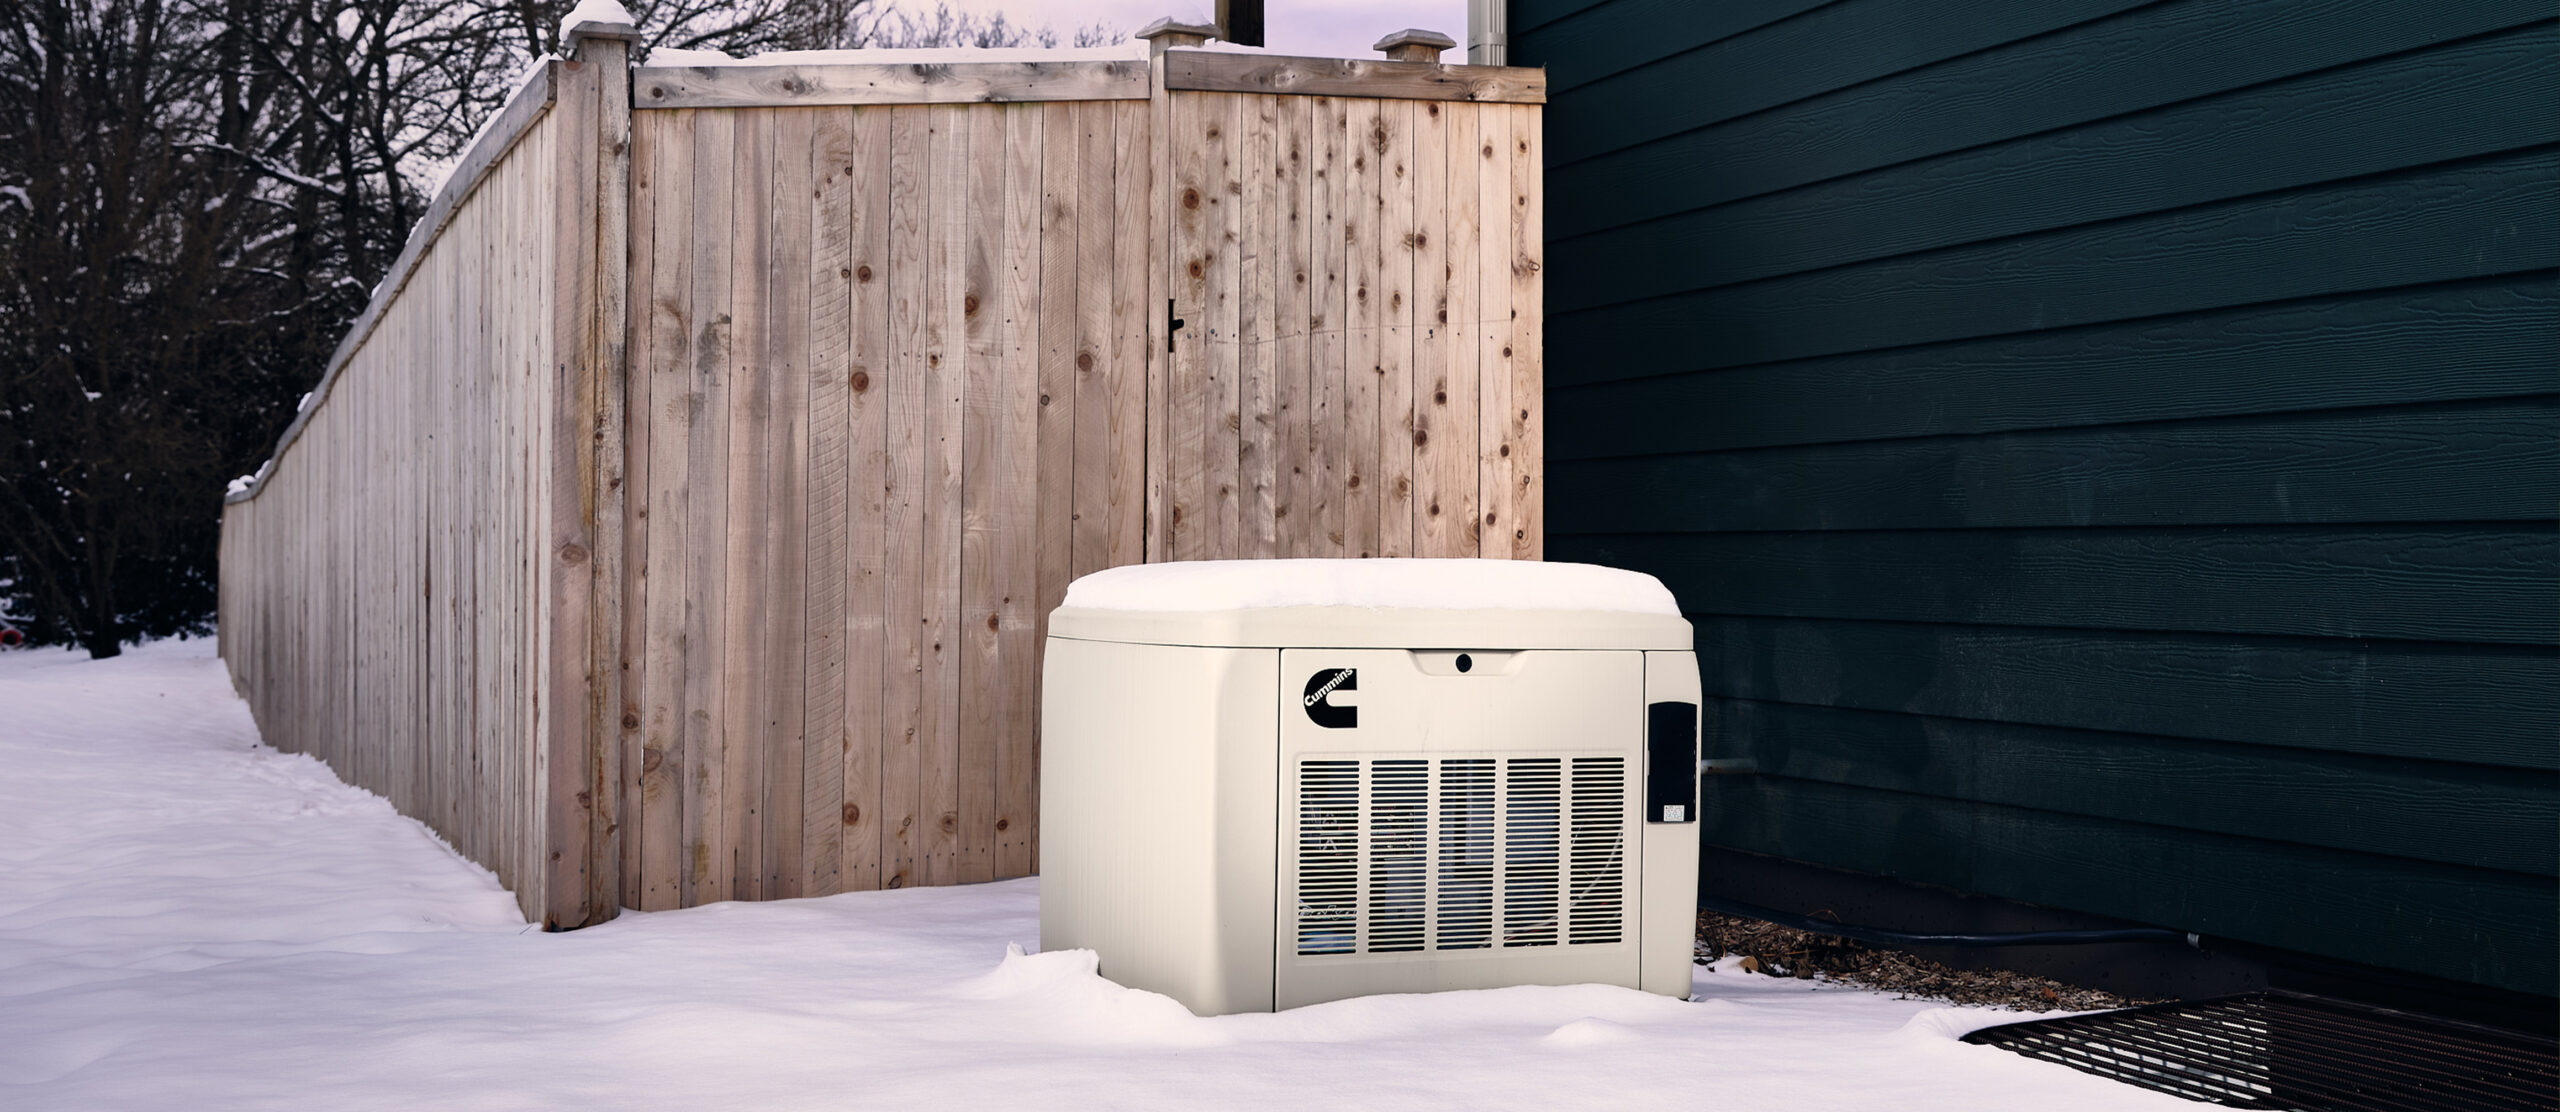 How to Prepare Your Standby Power Generator for the Winter